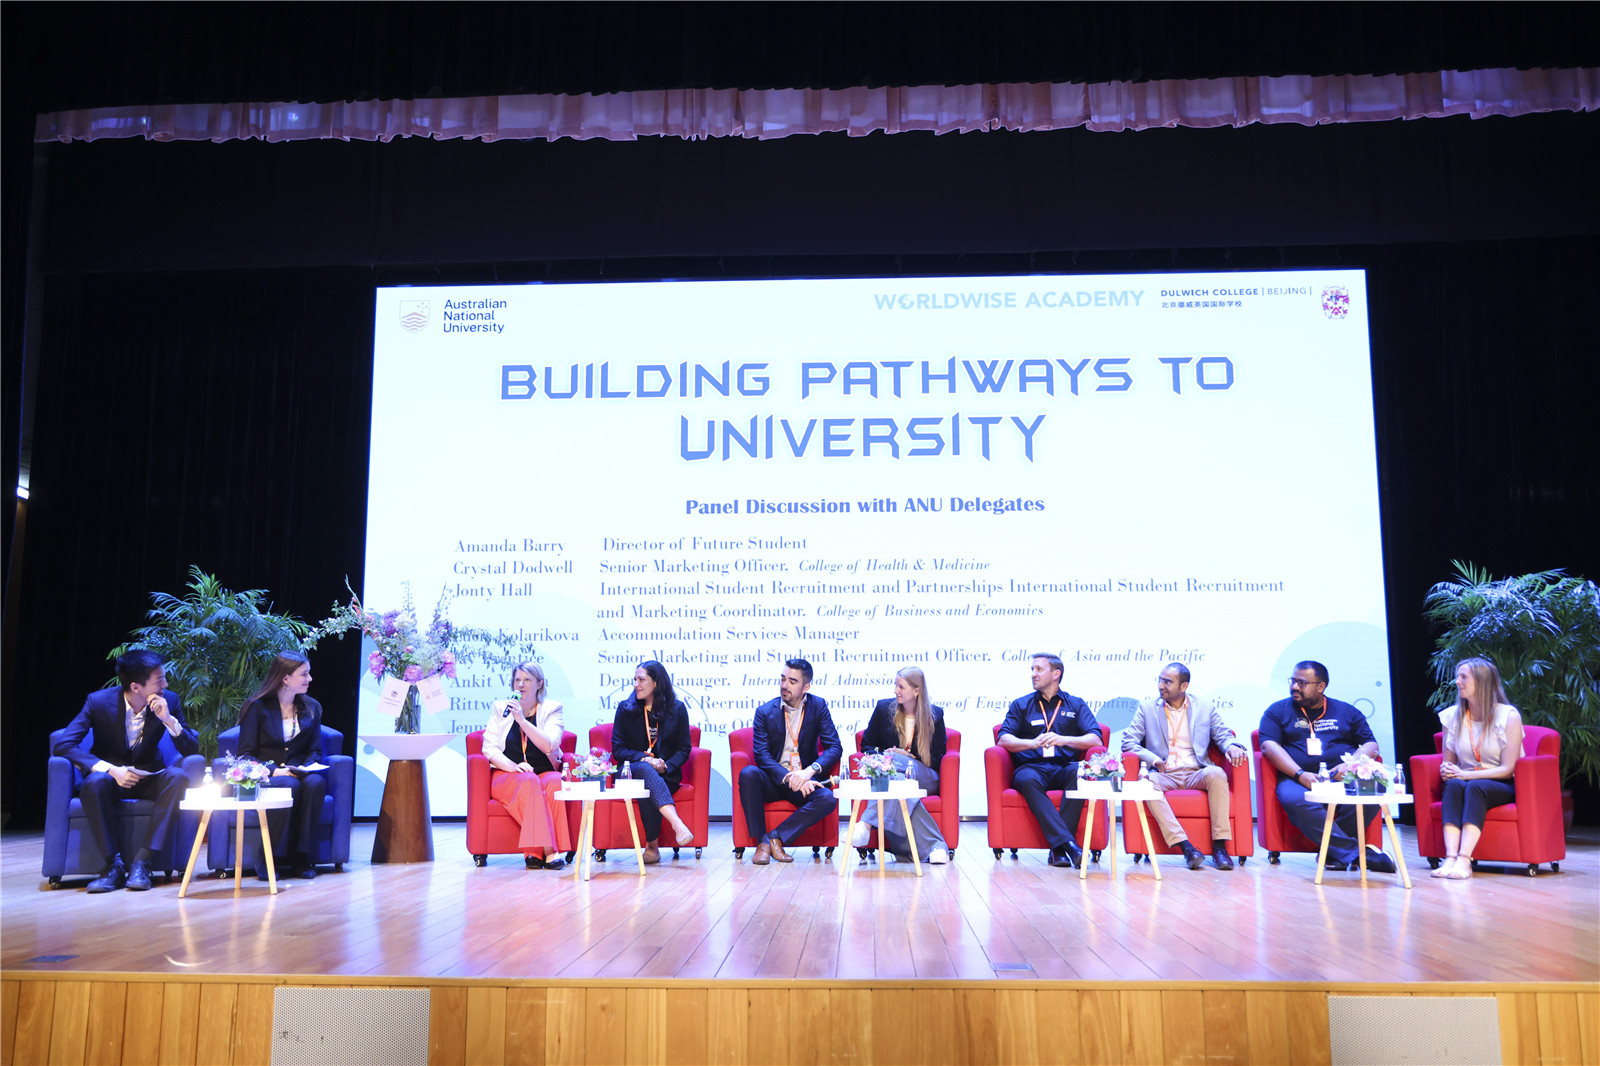 The panel on Building Pathways to University